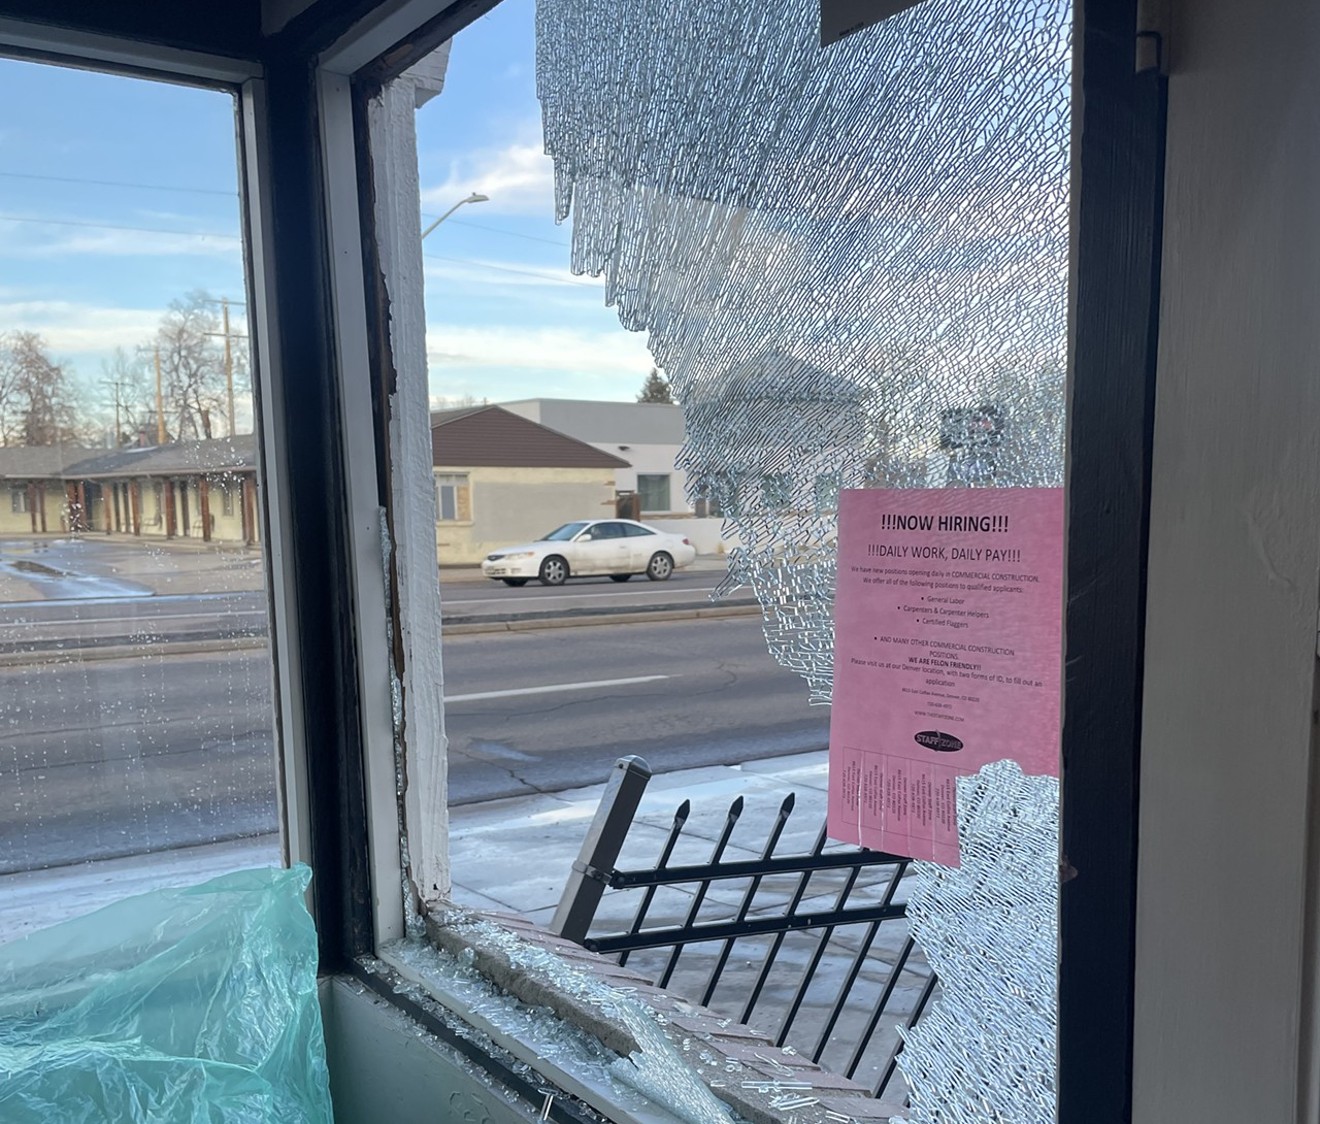 Two recent incidents damaged Glass Arrow Coffee on Colfax.